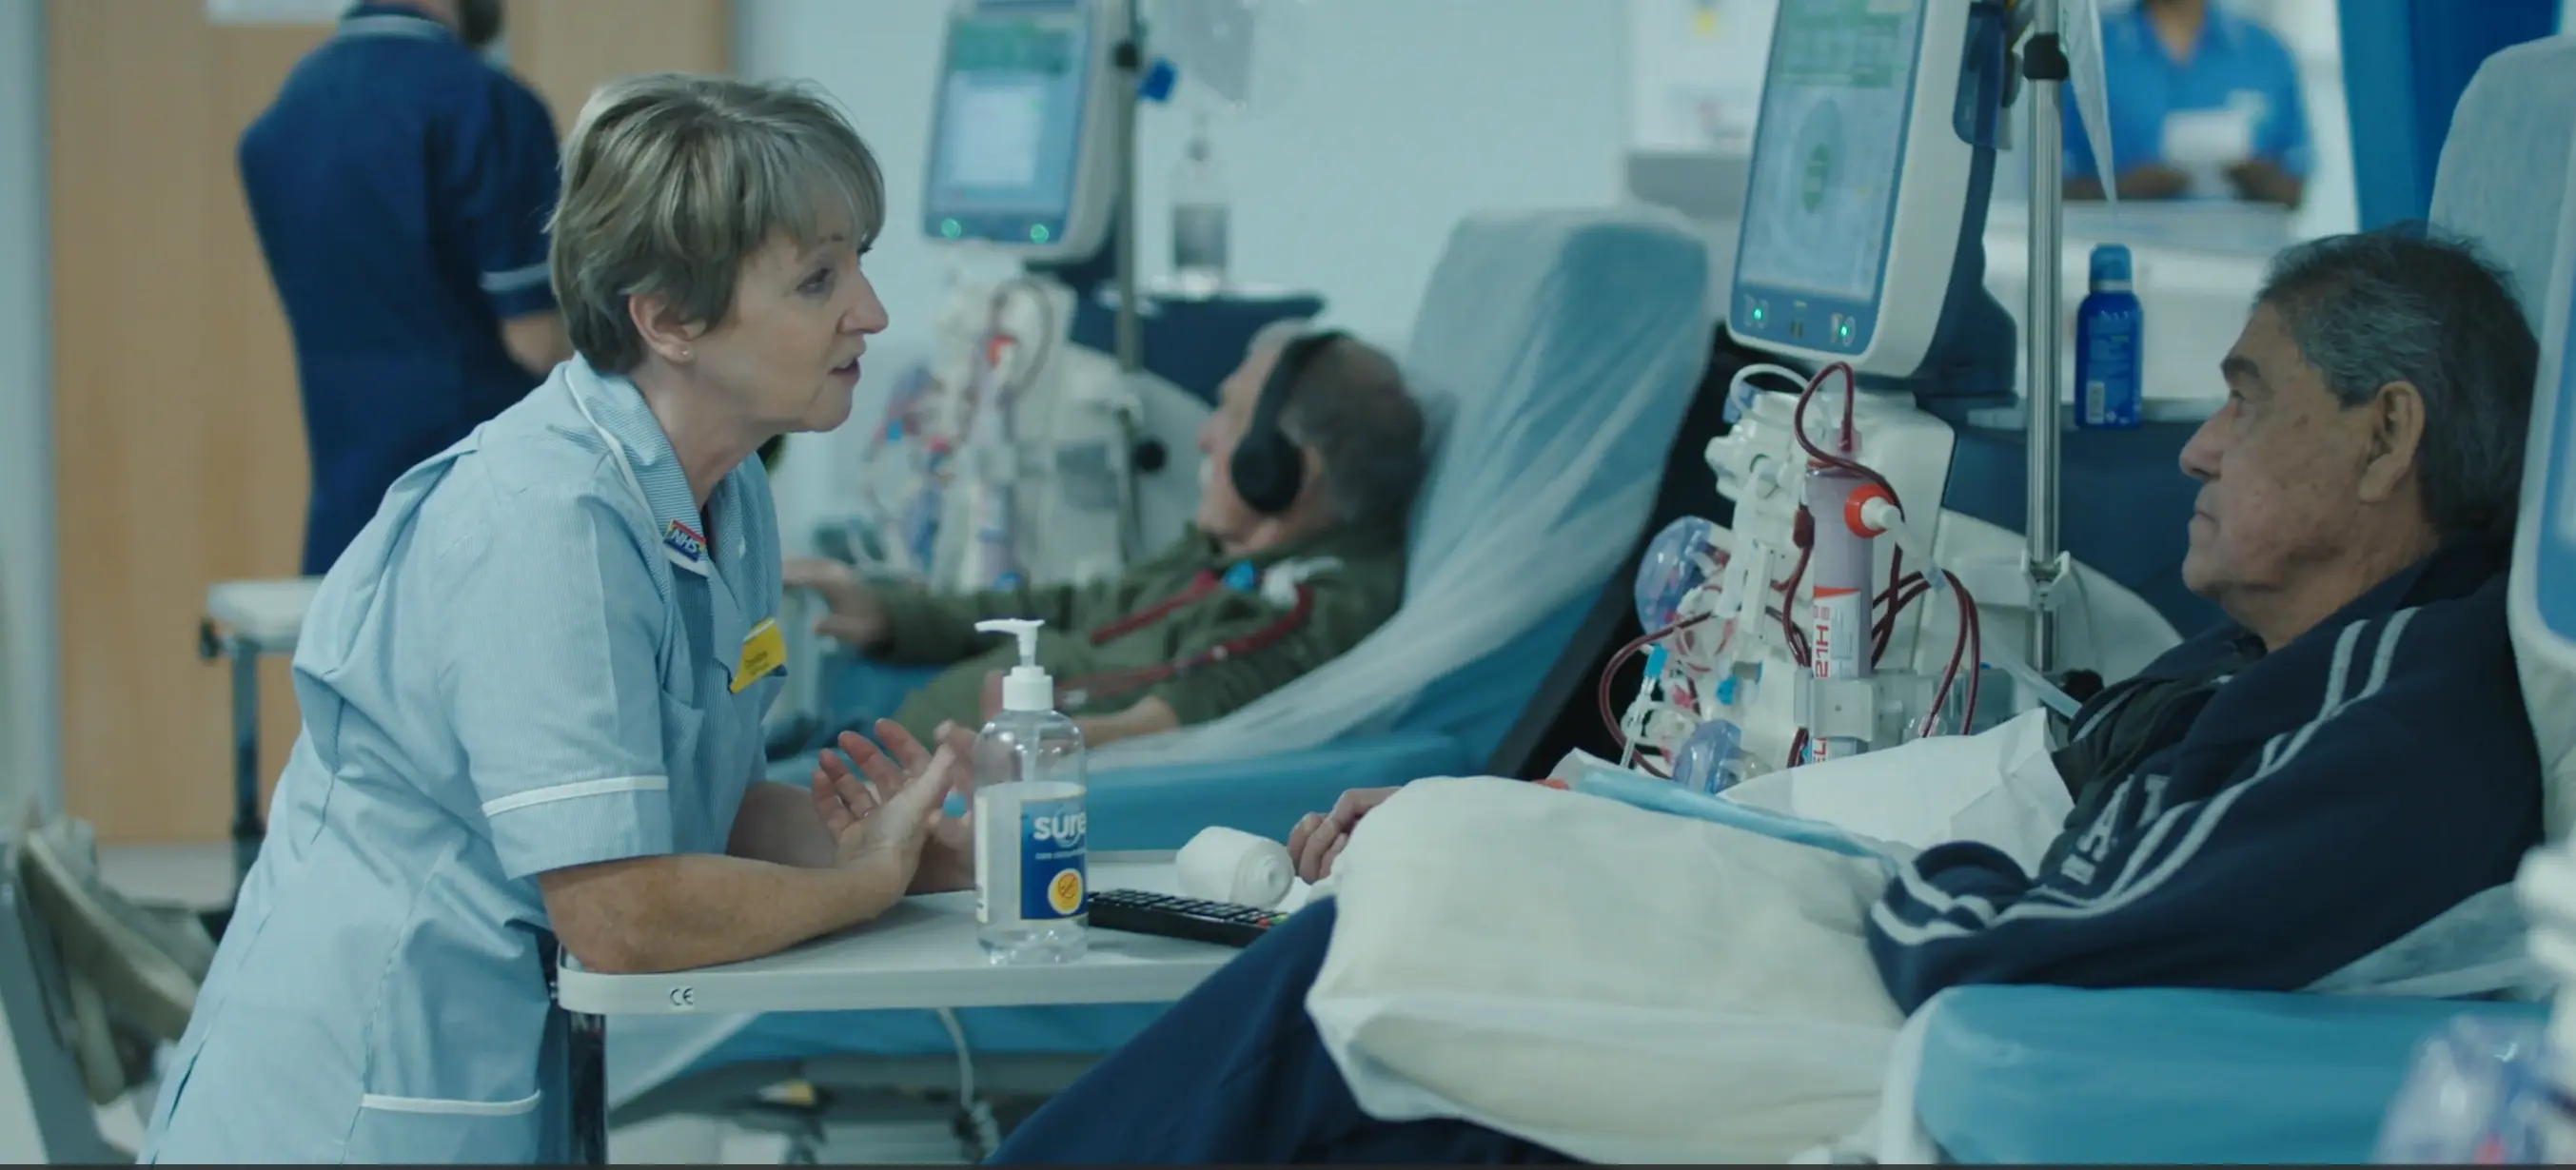 How Renal Services provides care with all their hearts - Featured Image